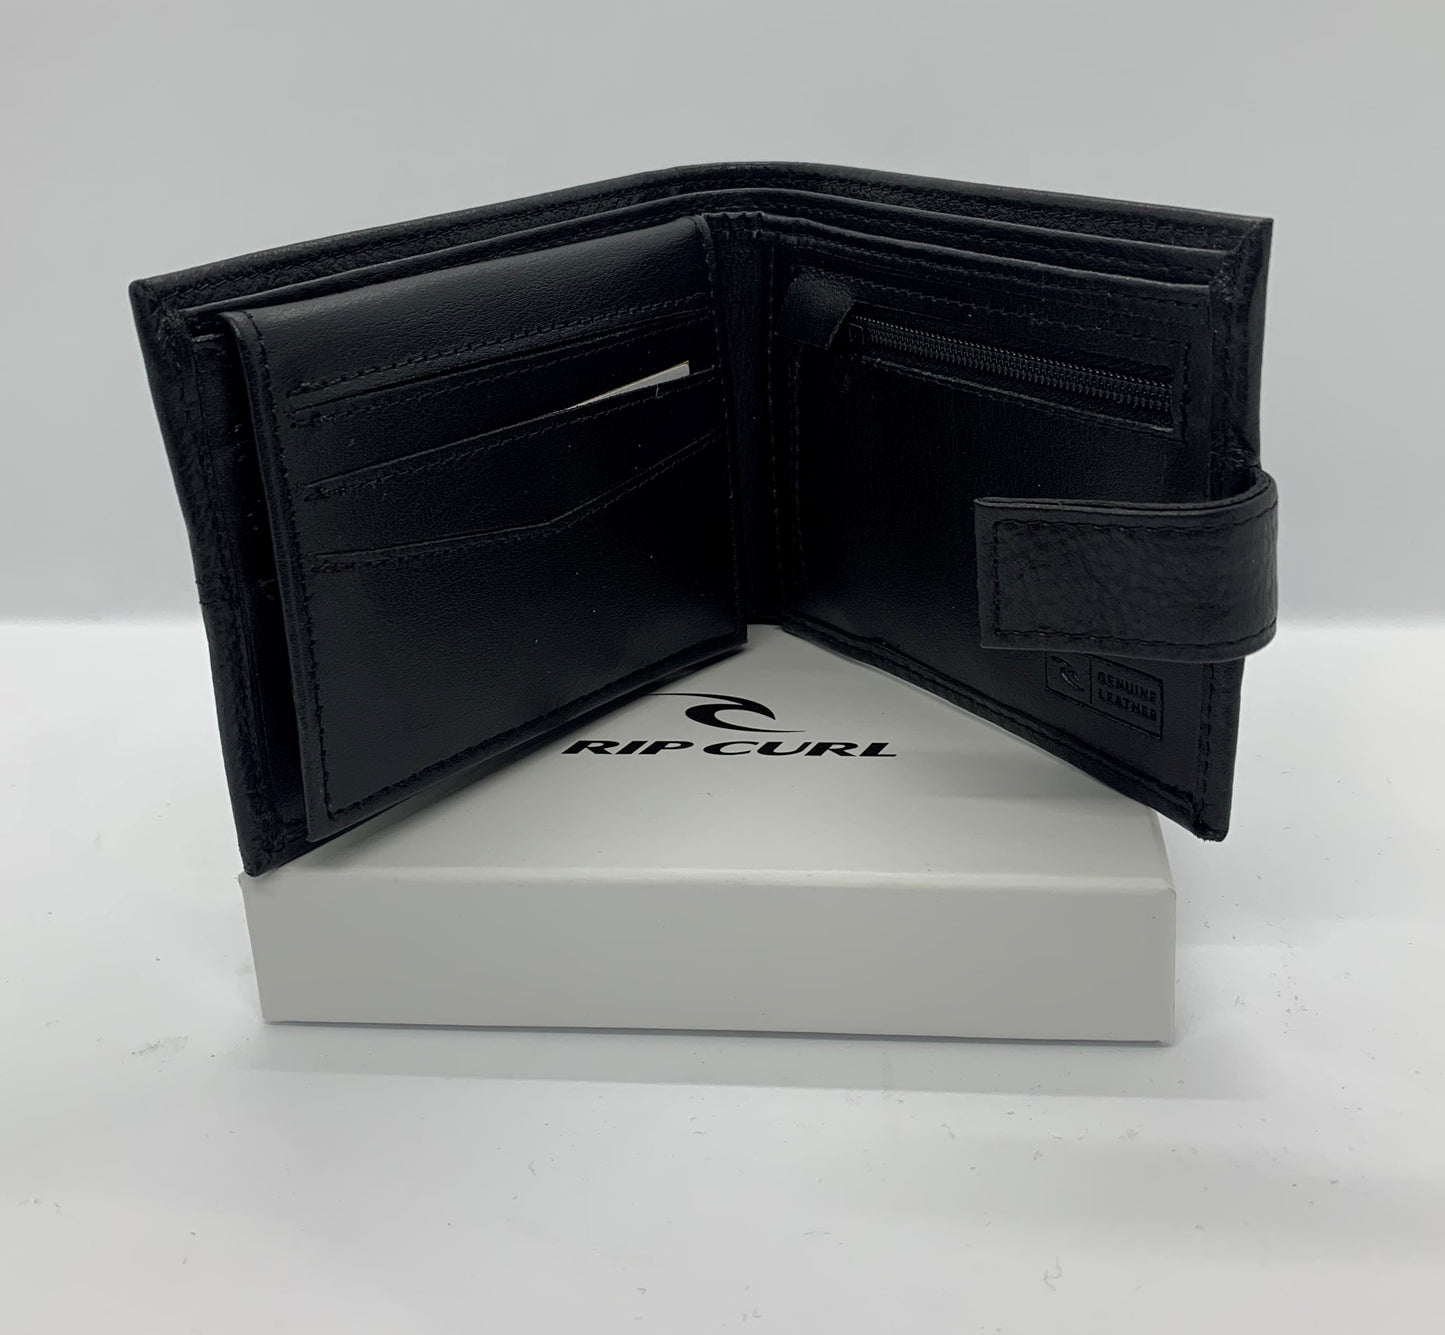 Rip Curl Flux Clip RFID All Day Leather Wallet